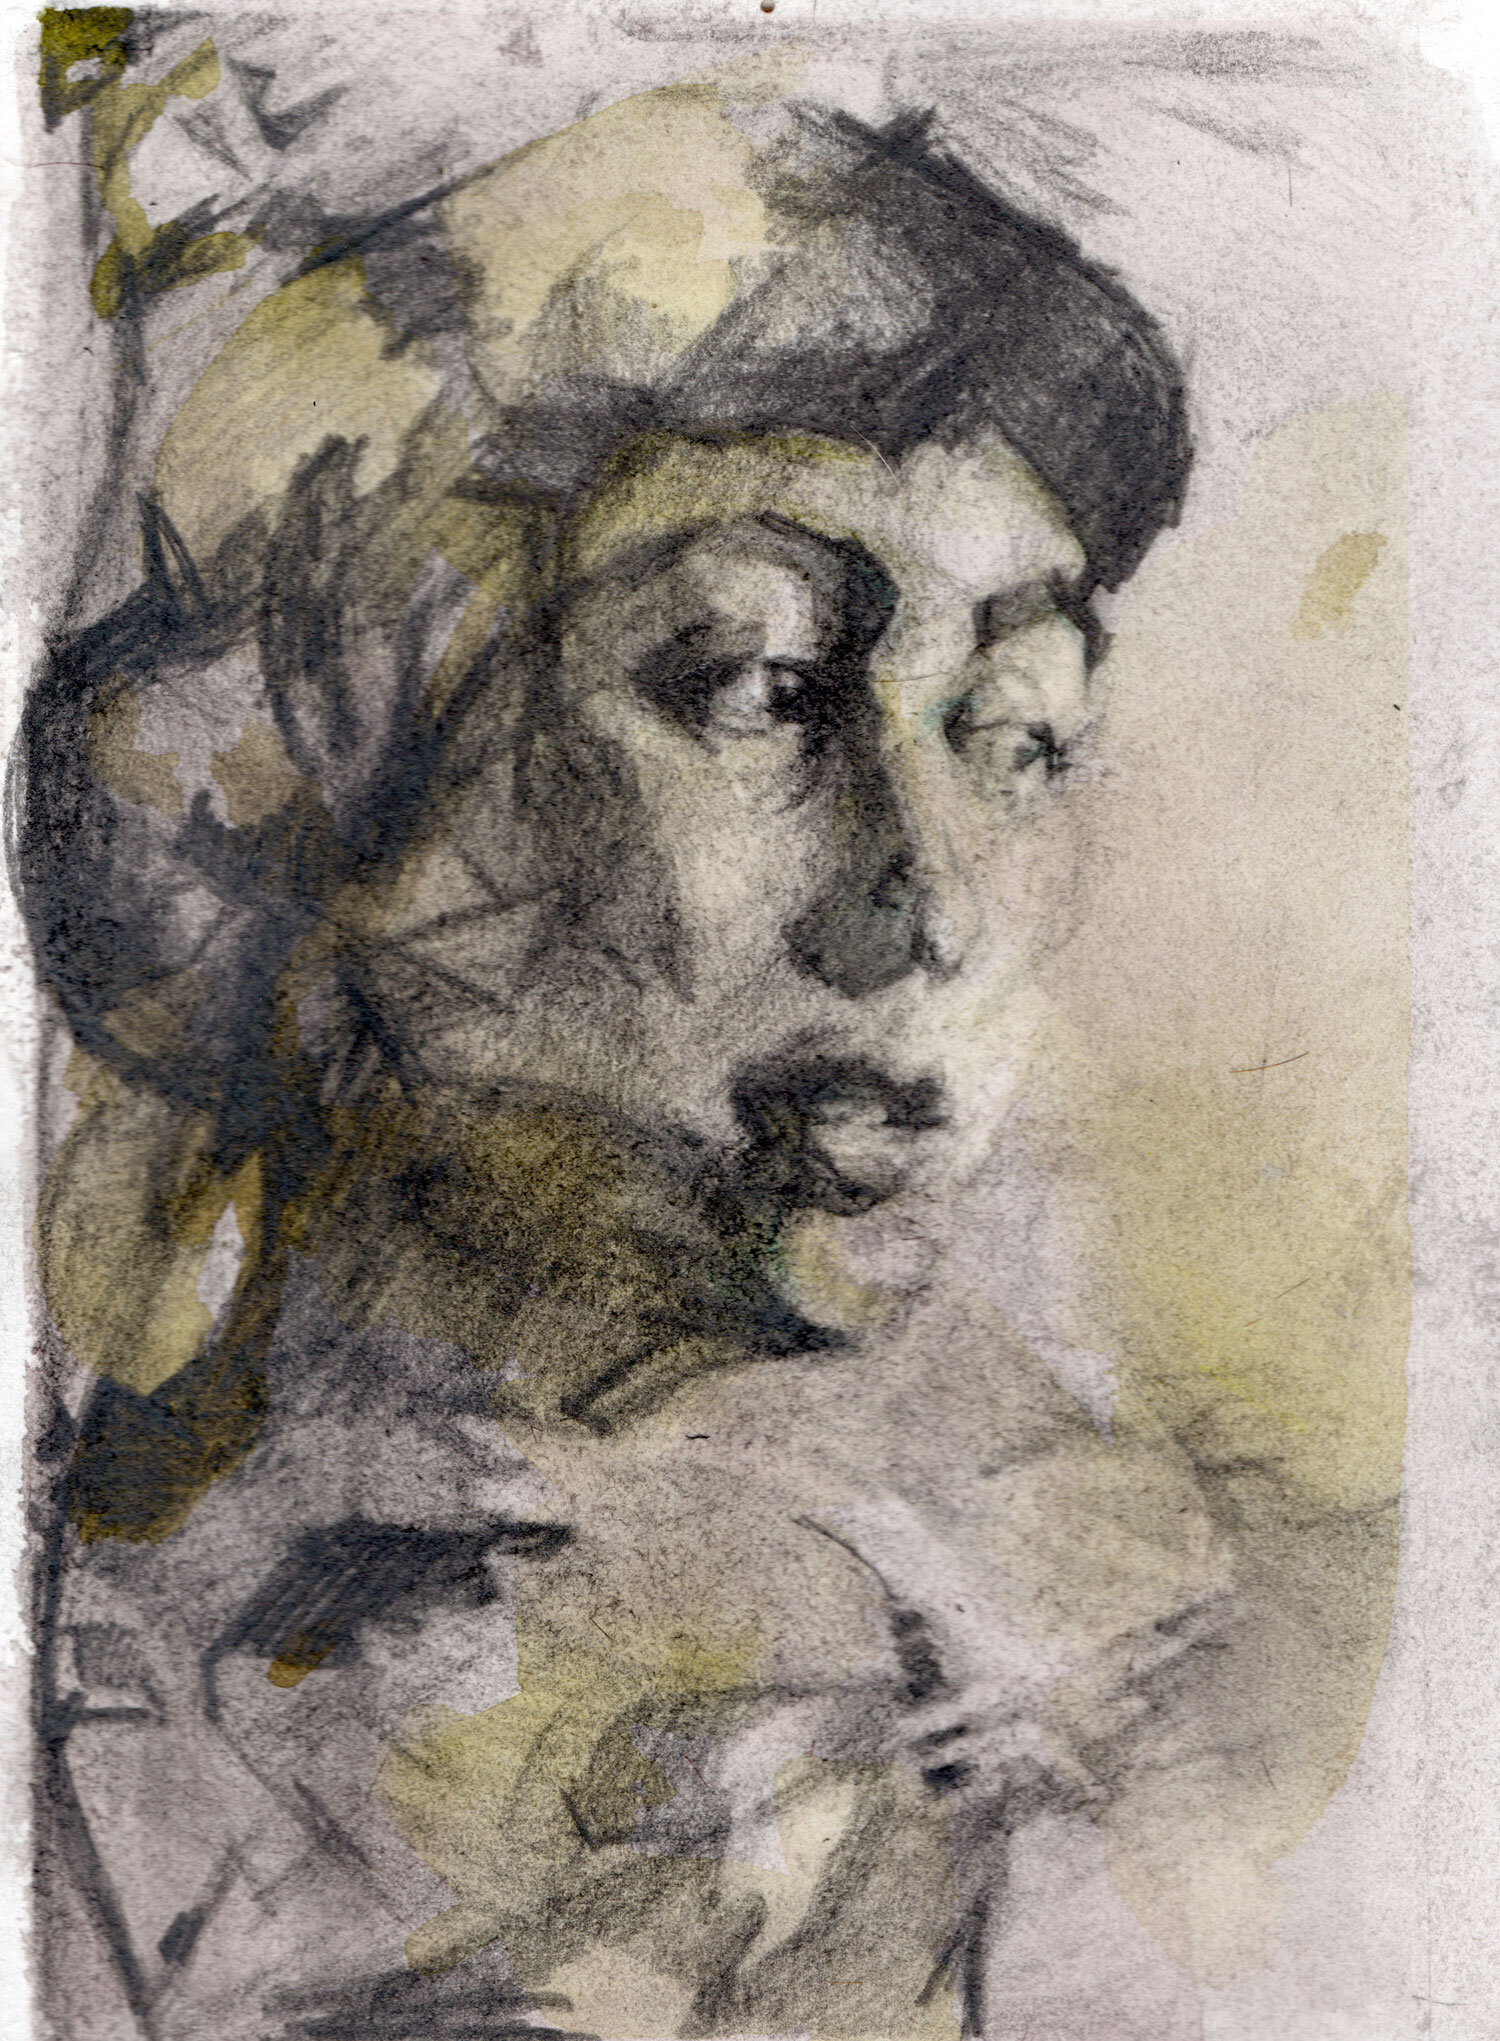  Woman In Dappled Light, Watercolor and graphite on paper, 9x6, 2019, SOLD 